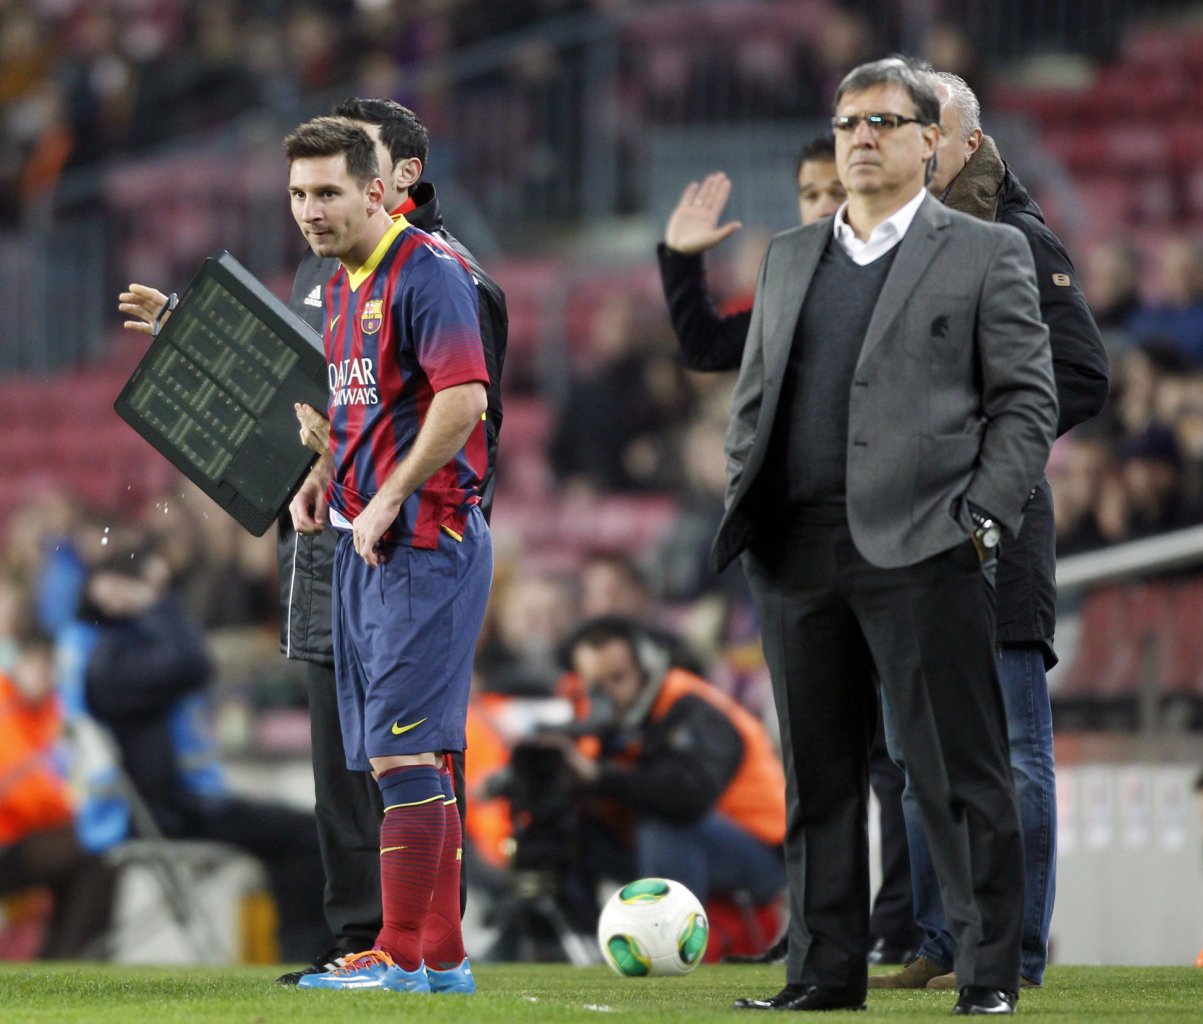 Lionel Messi about to come in, on his return after injury